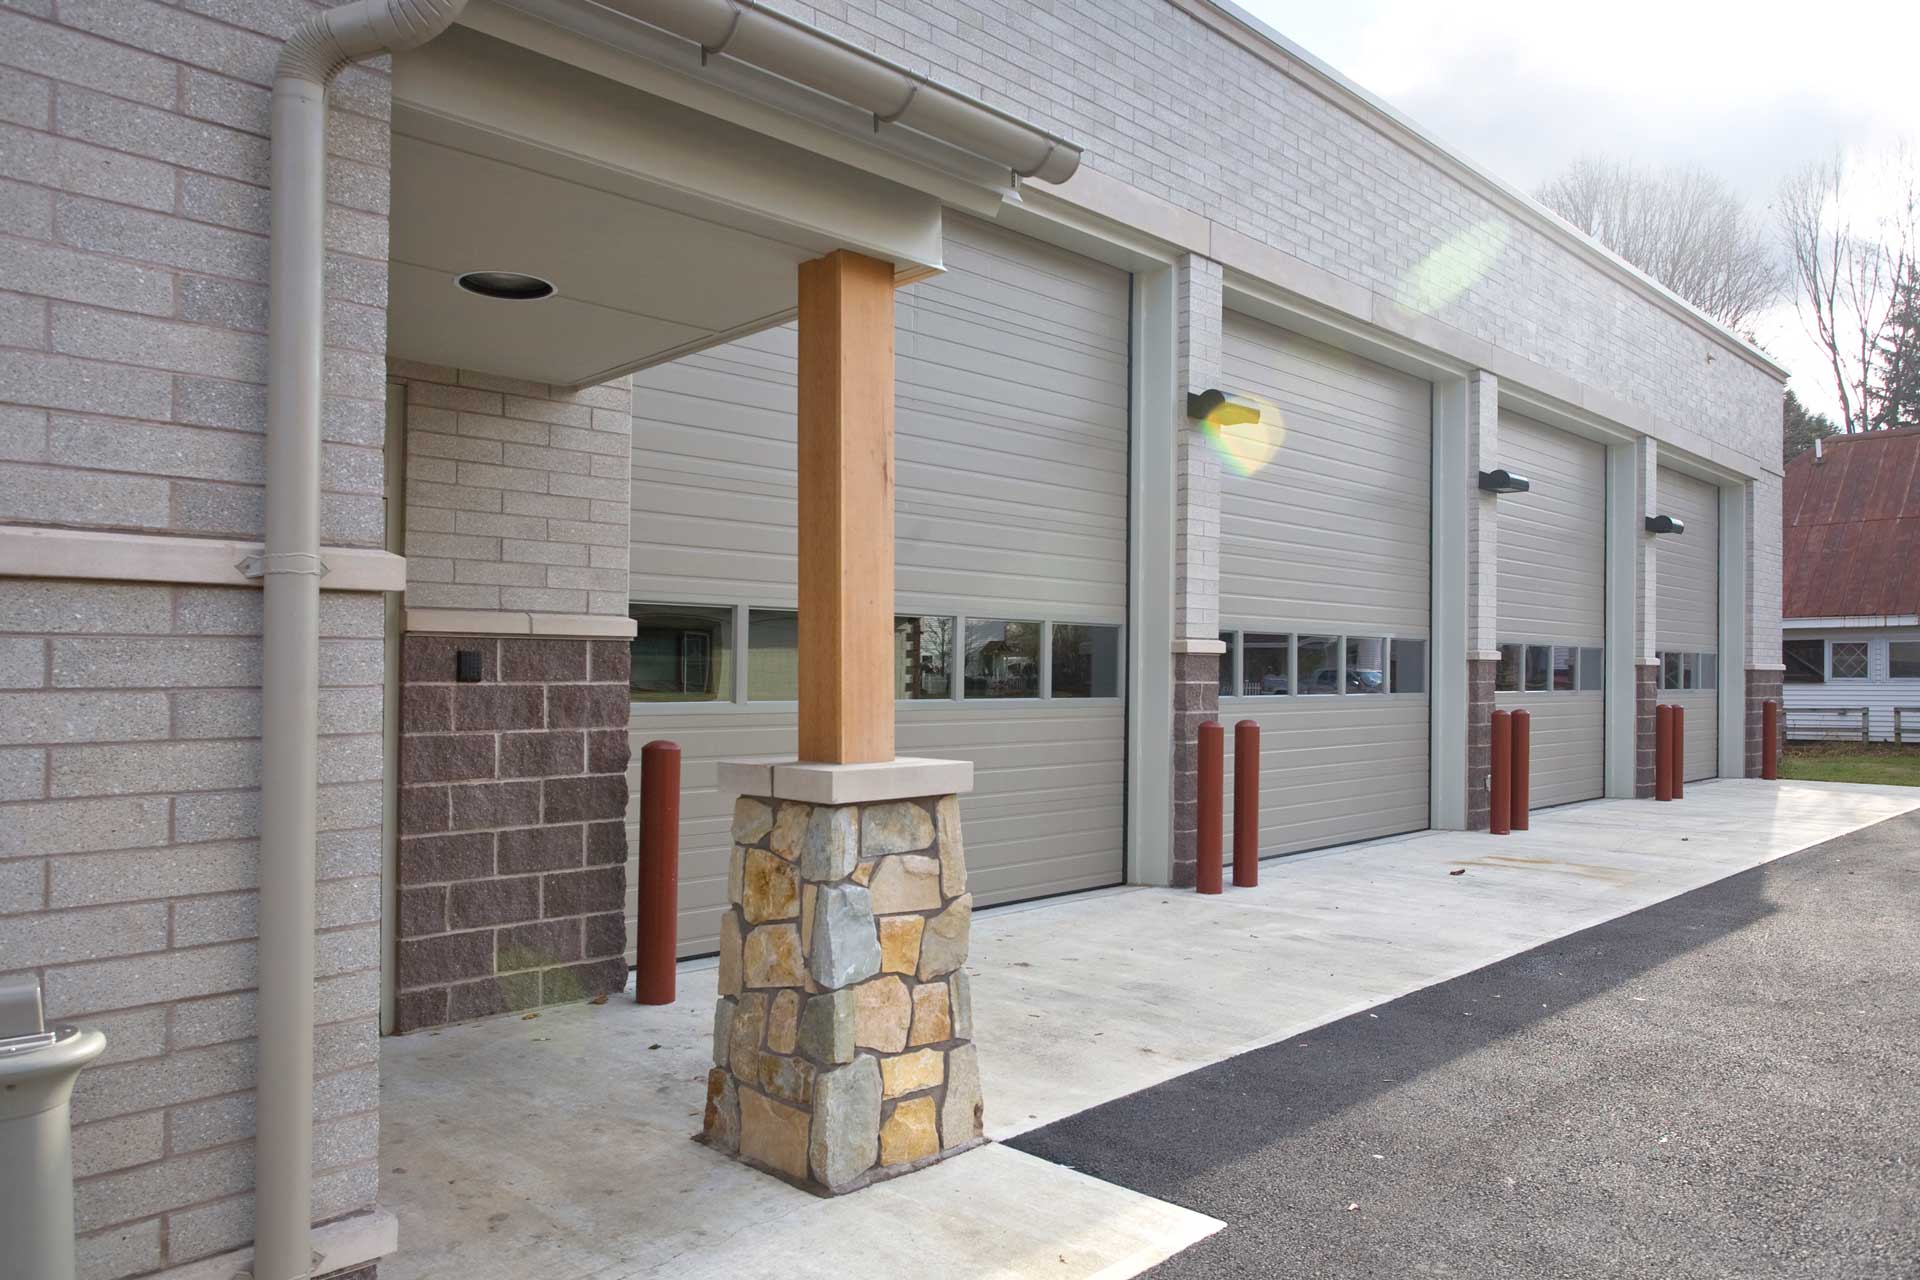 Photo of garage bay doors, civic firehouse project